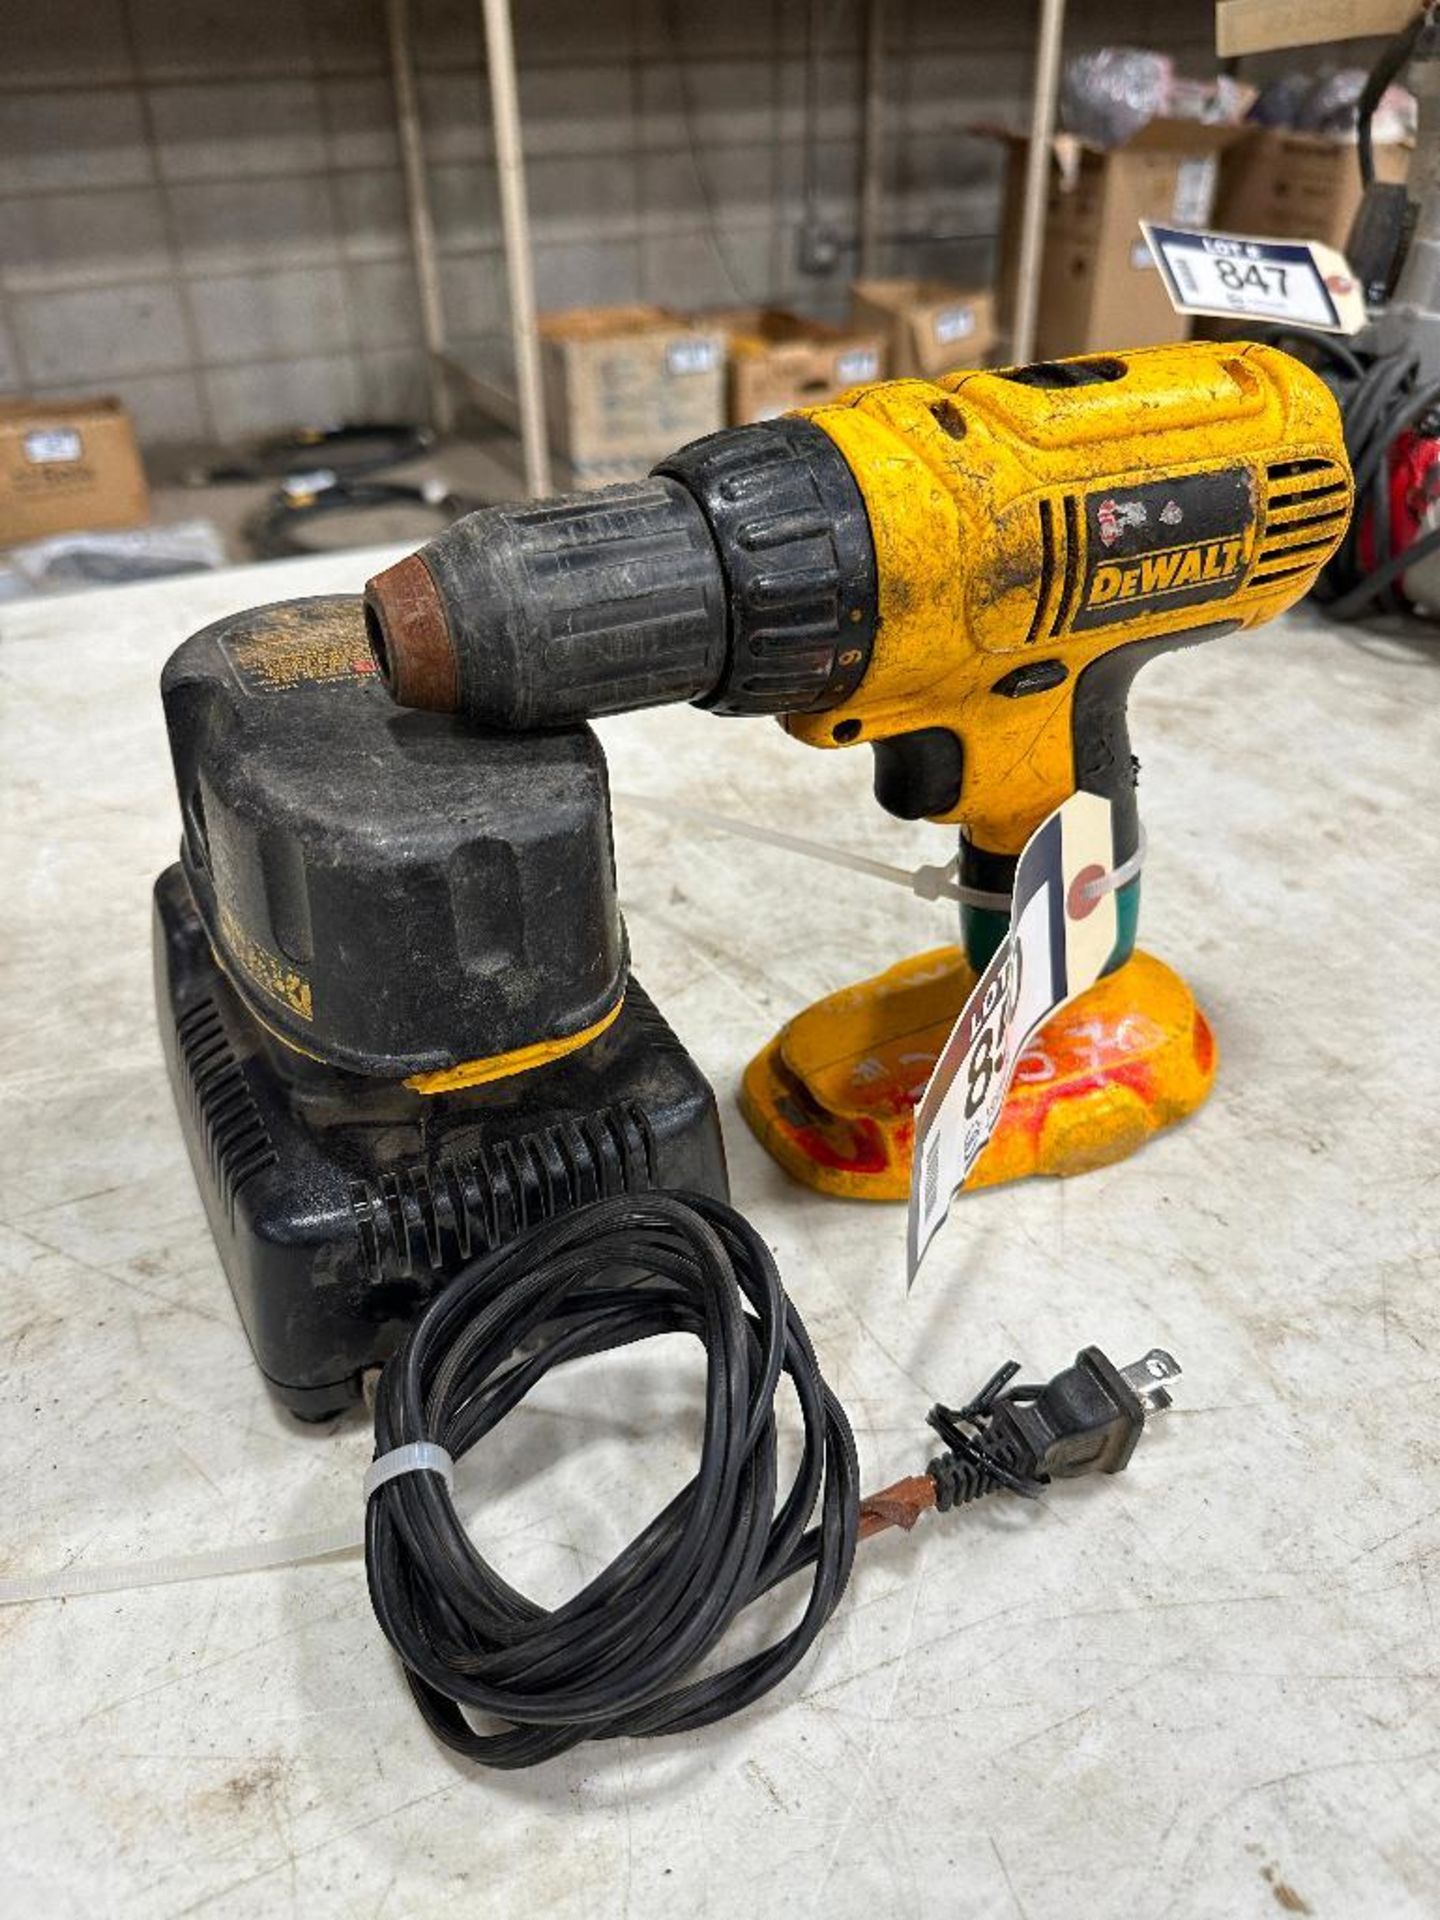 DeWalt 18V DC759 Cordless Drill w/ Battery and Charger - Image 2 of 5